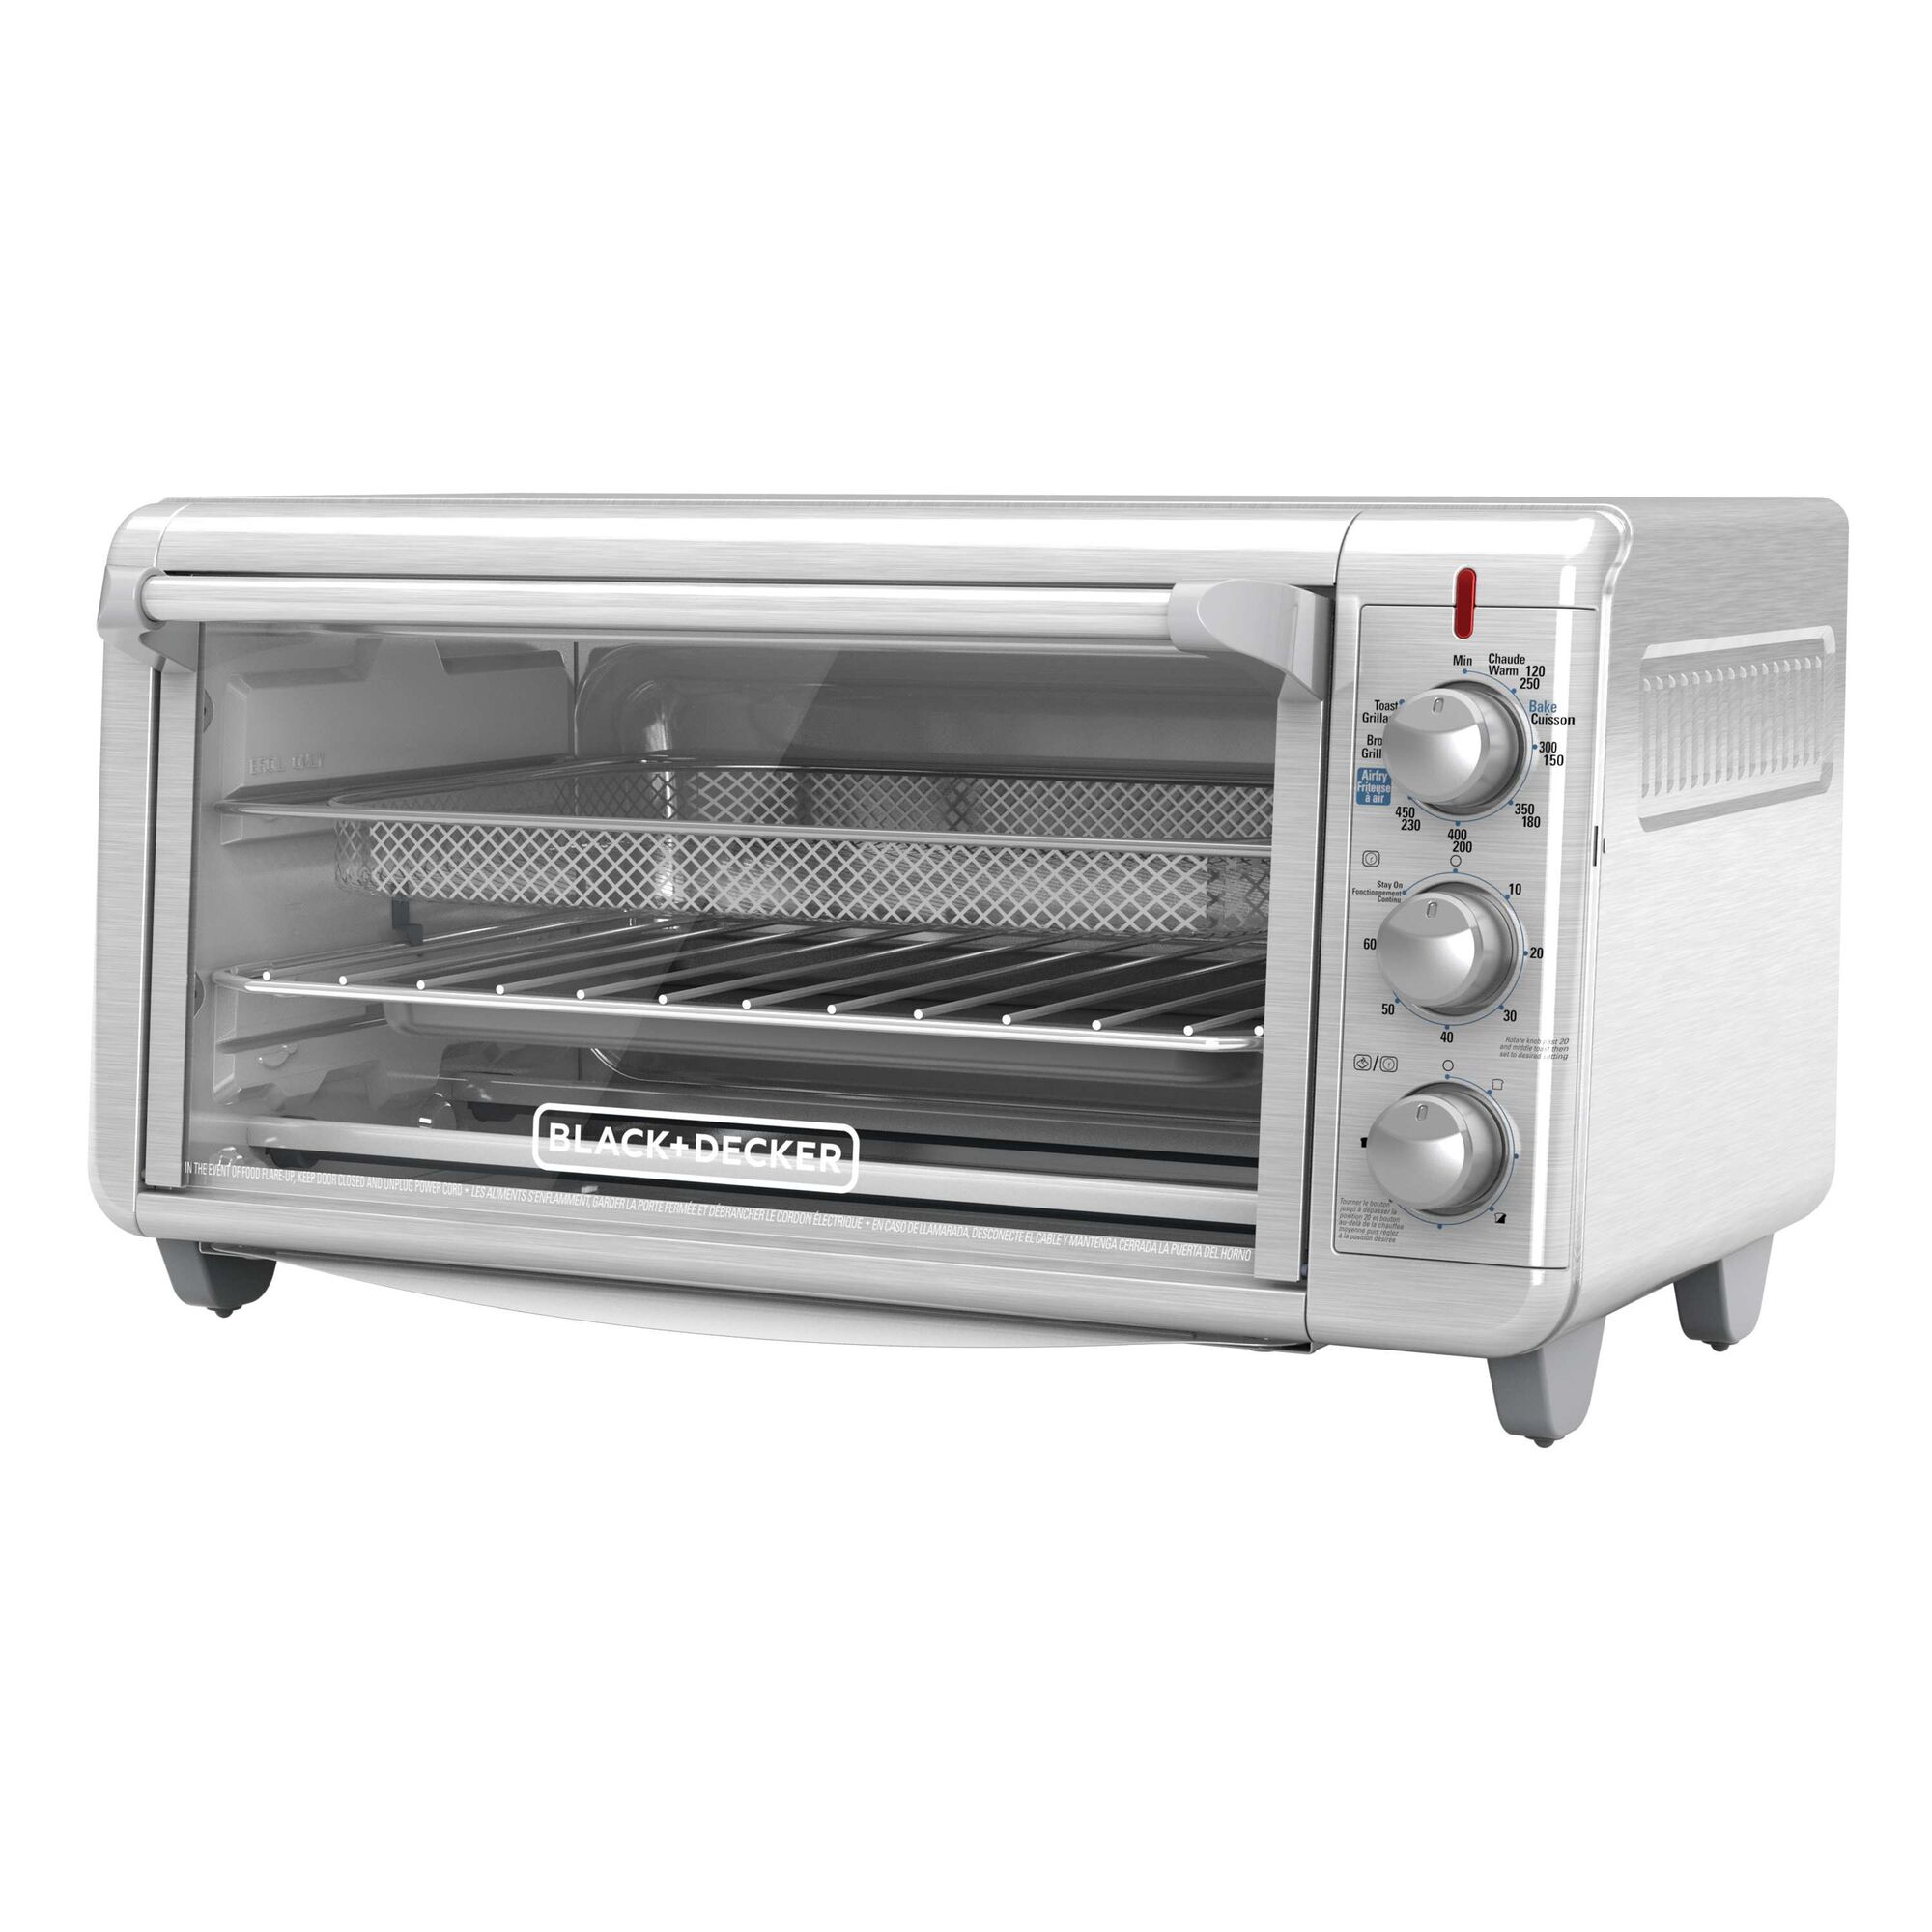 BLACK DECKER Extra Wide Crisp And Bake Air Fry Toaster Oven.